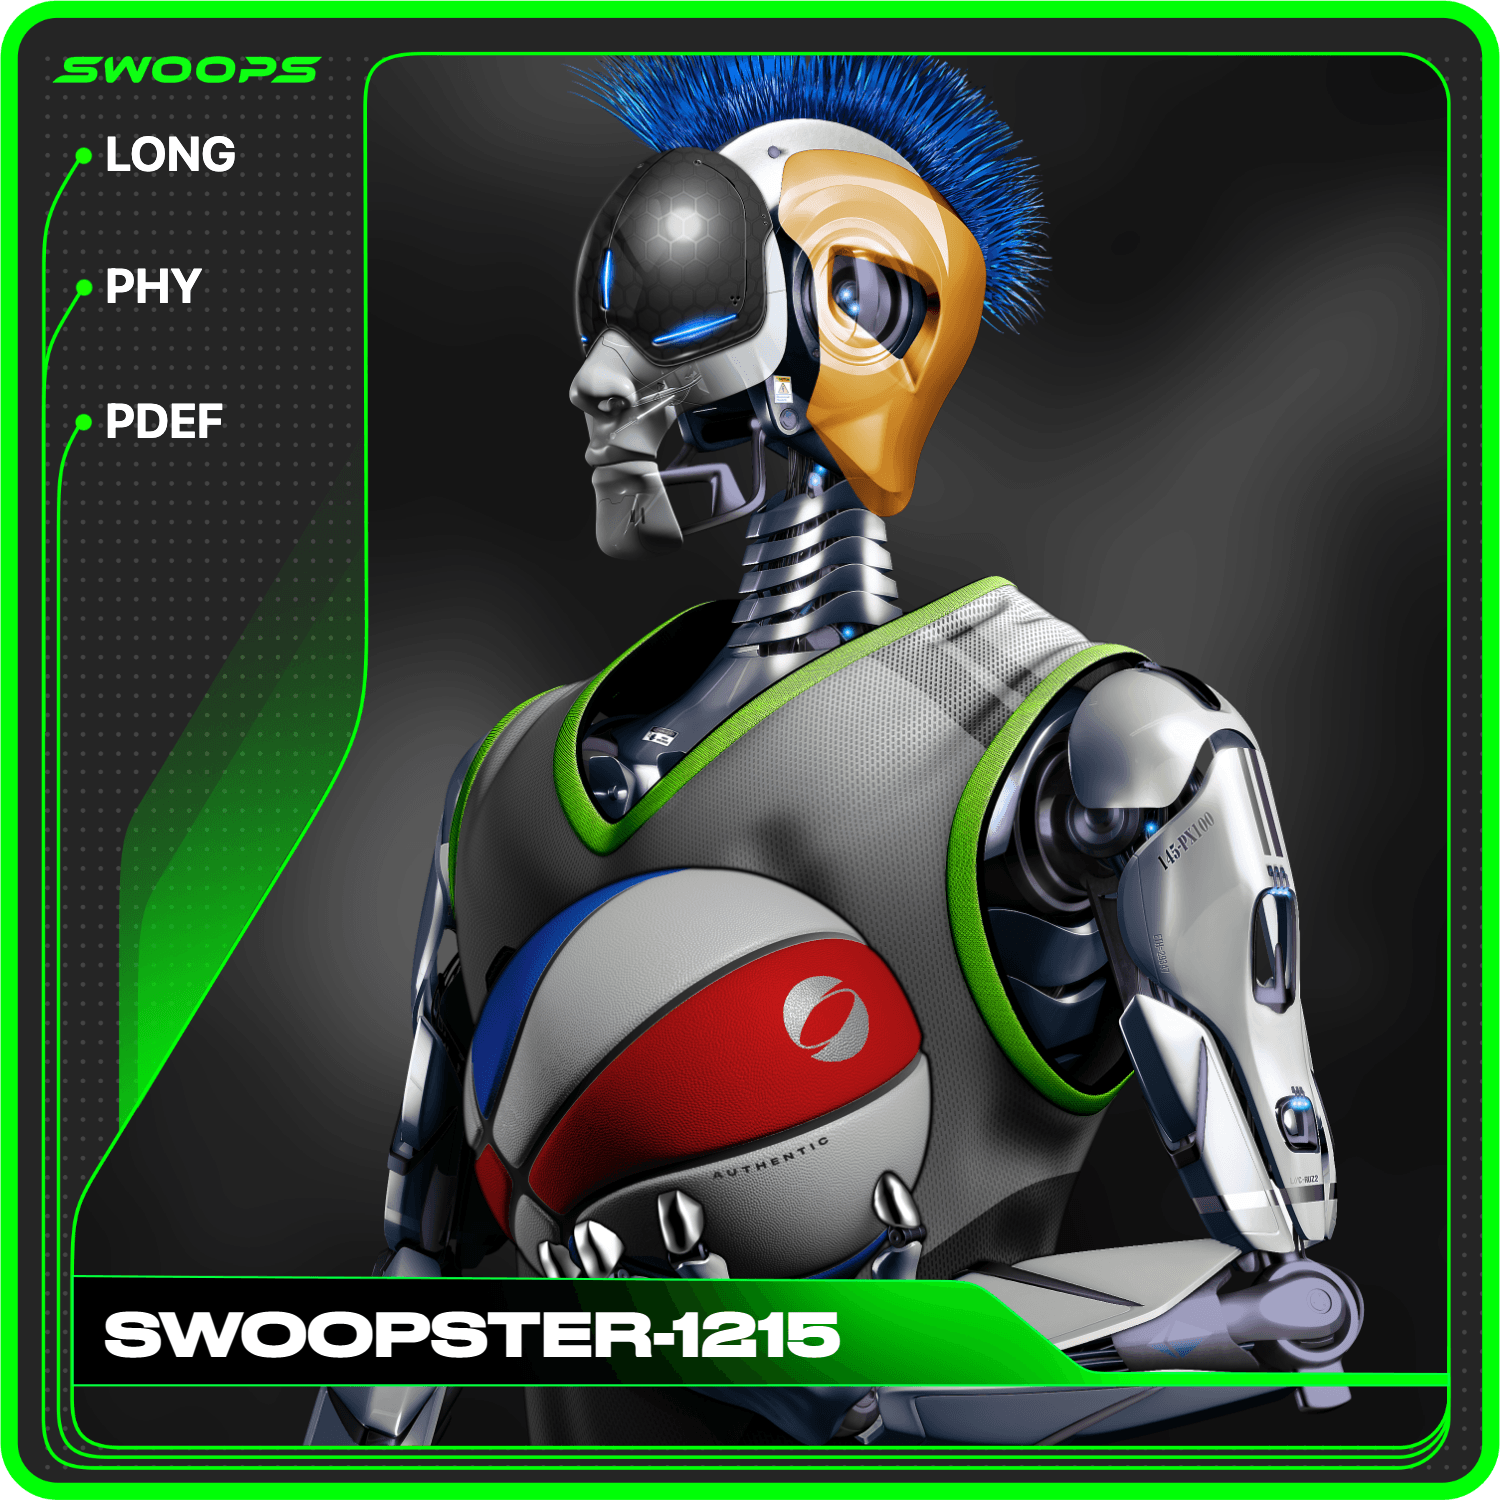 SWOOPSTER-1215